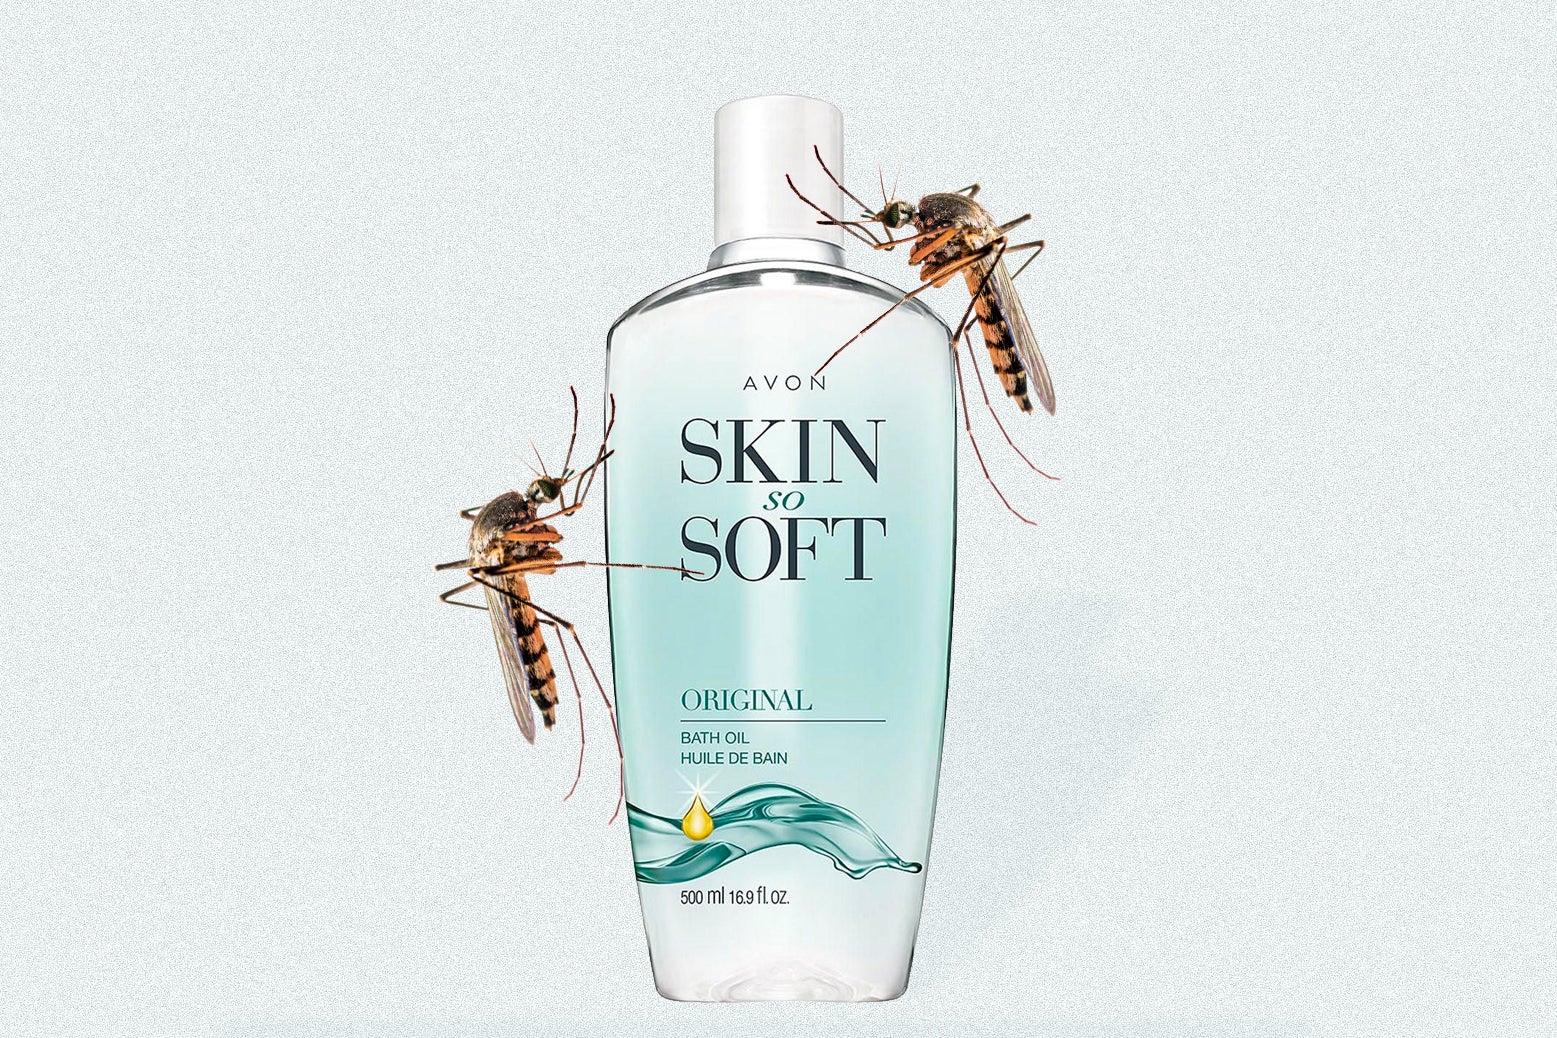 Does Skin So Soft as bug repellent work?